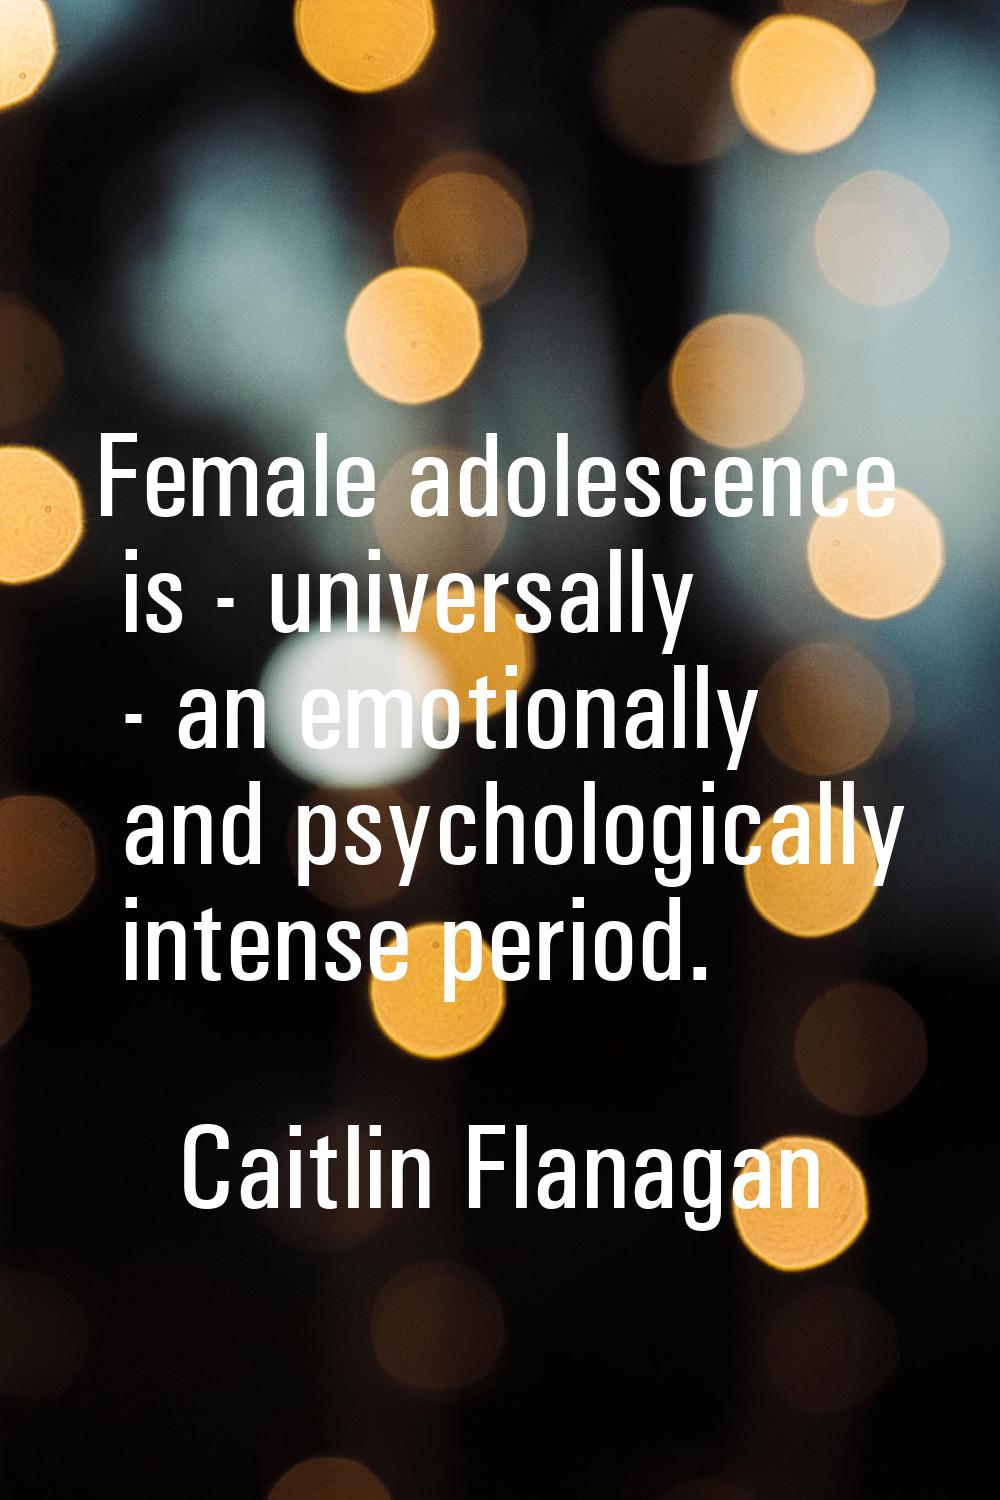 Female adolescence is - universally - an emotionally and psychologically intense period.